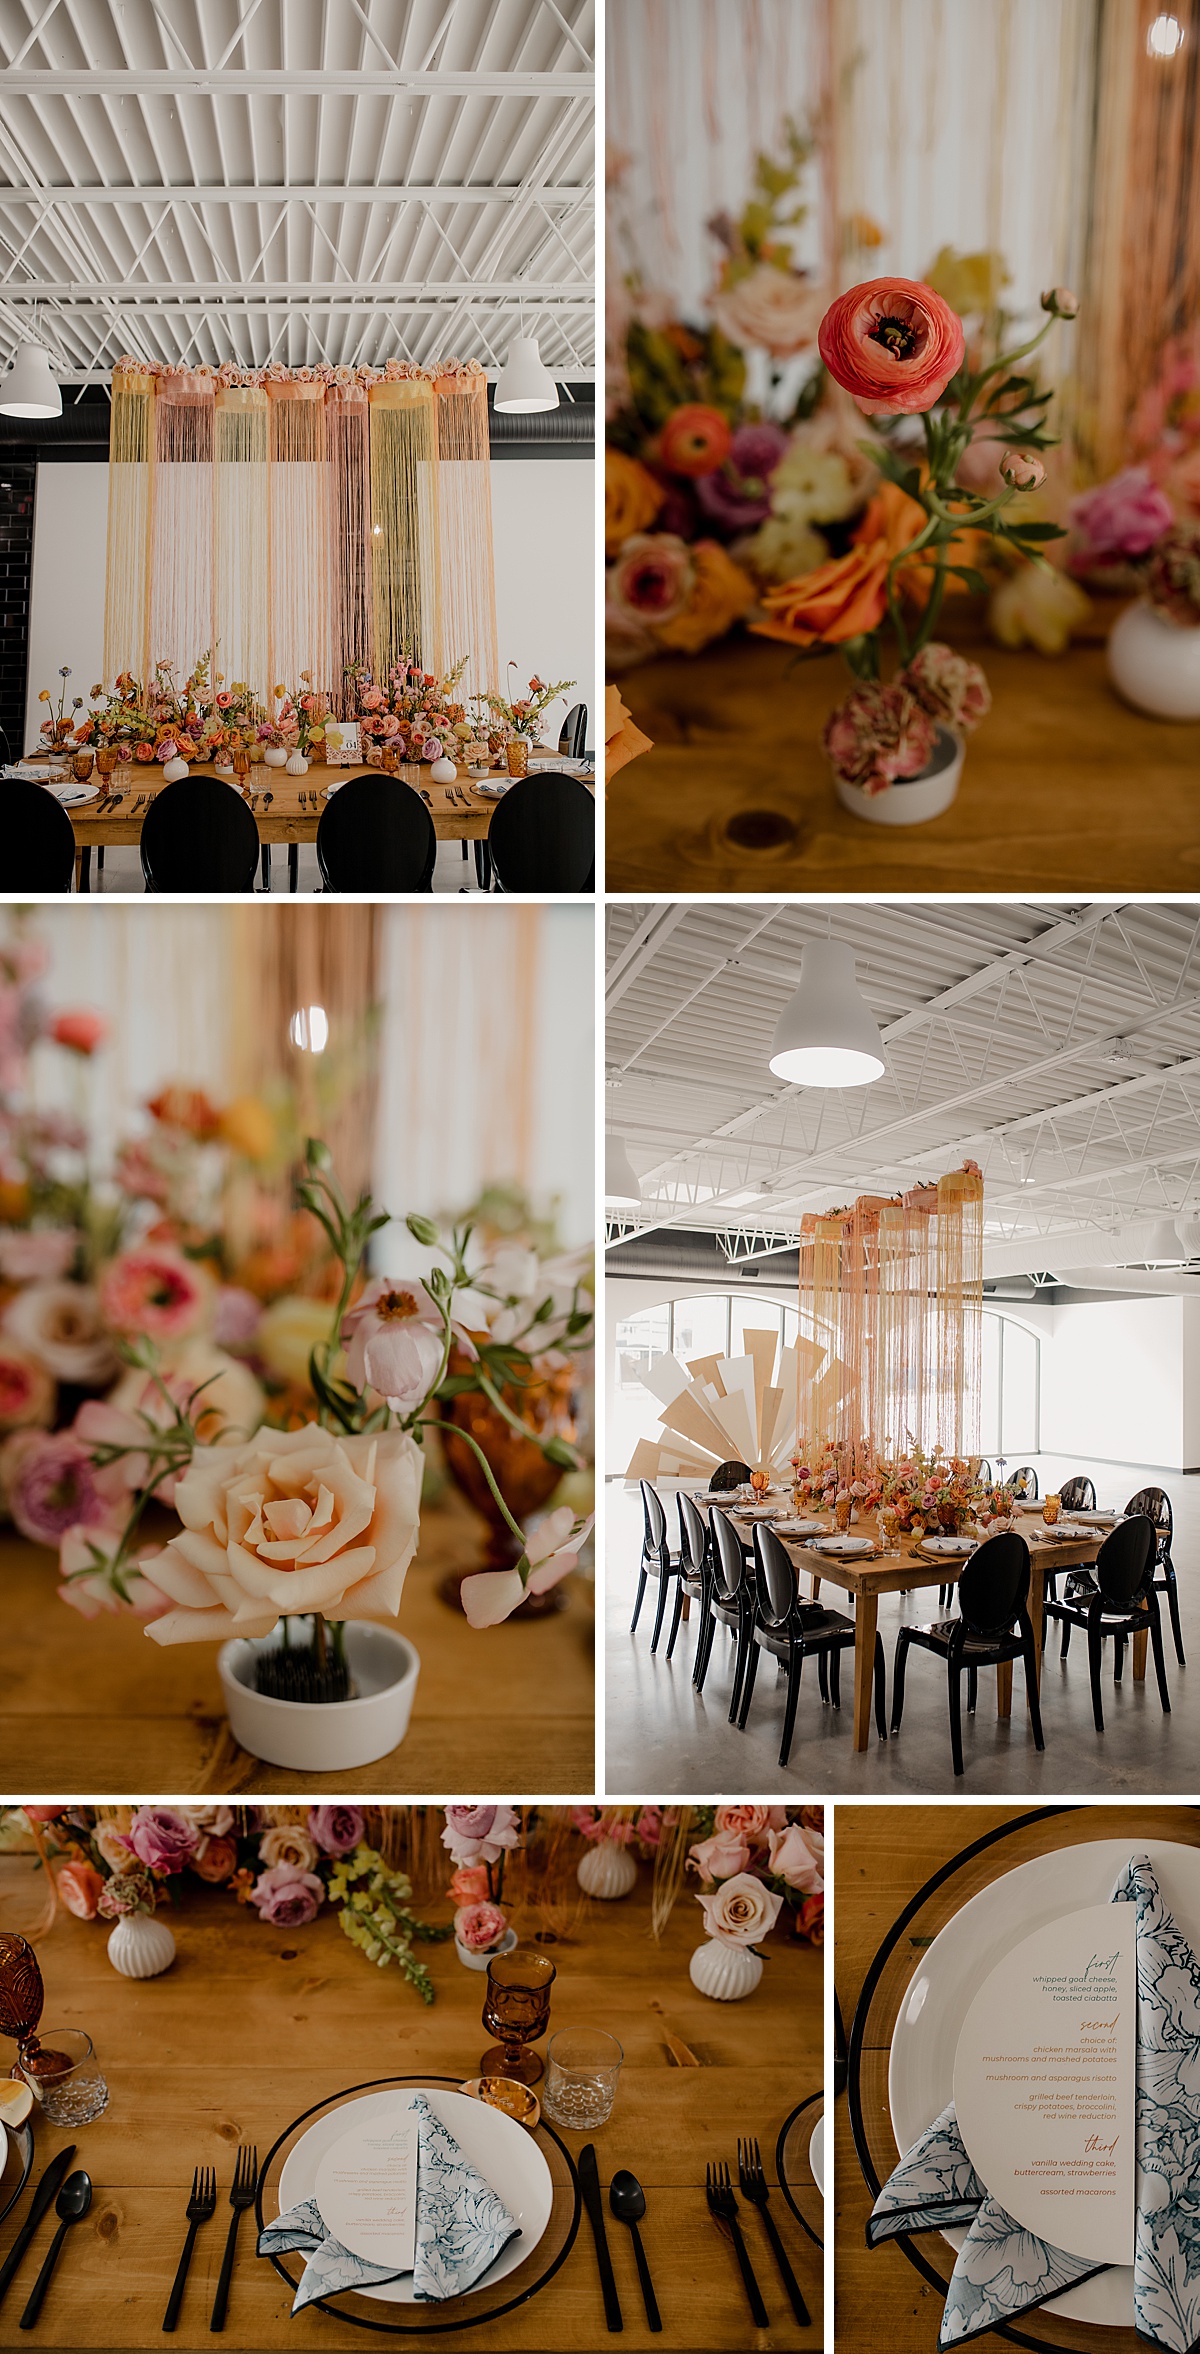 Modern colorful wedding tablescape and vibrant decor with black chairs, flowers and a custom fringe installation.